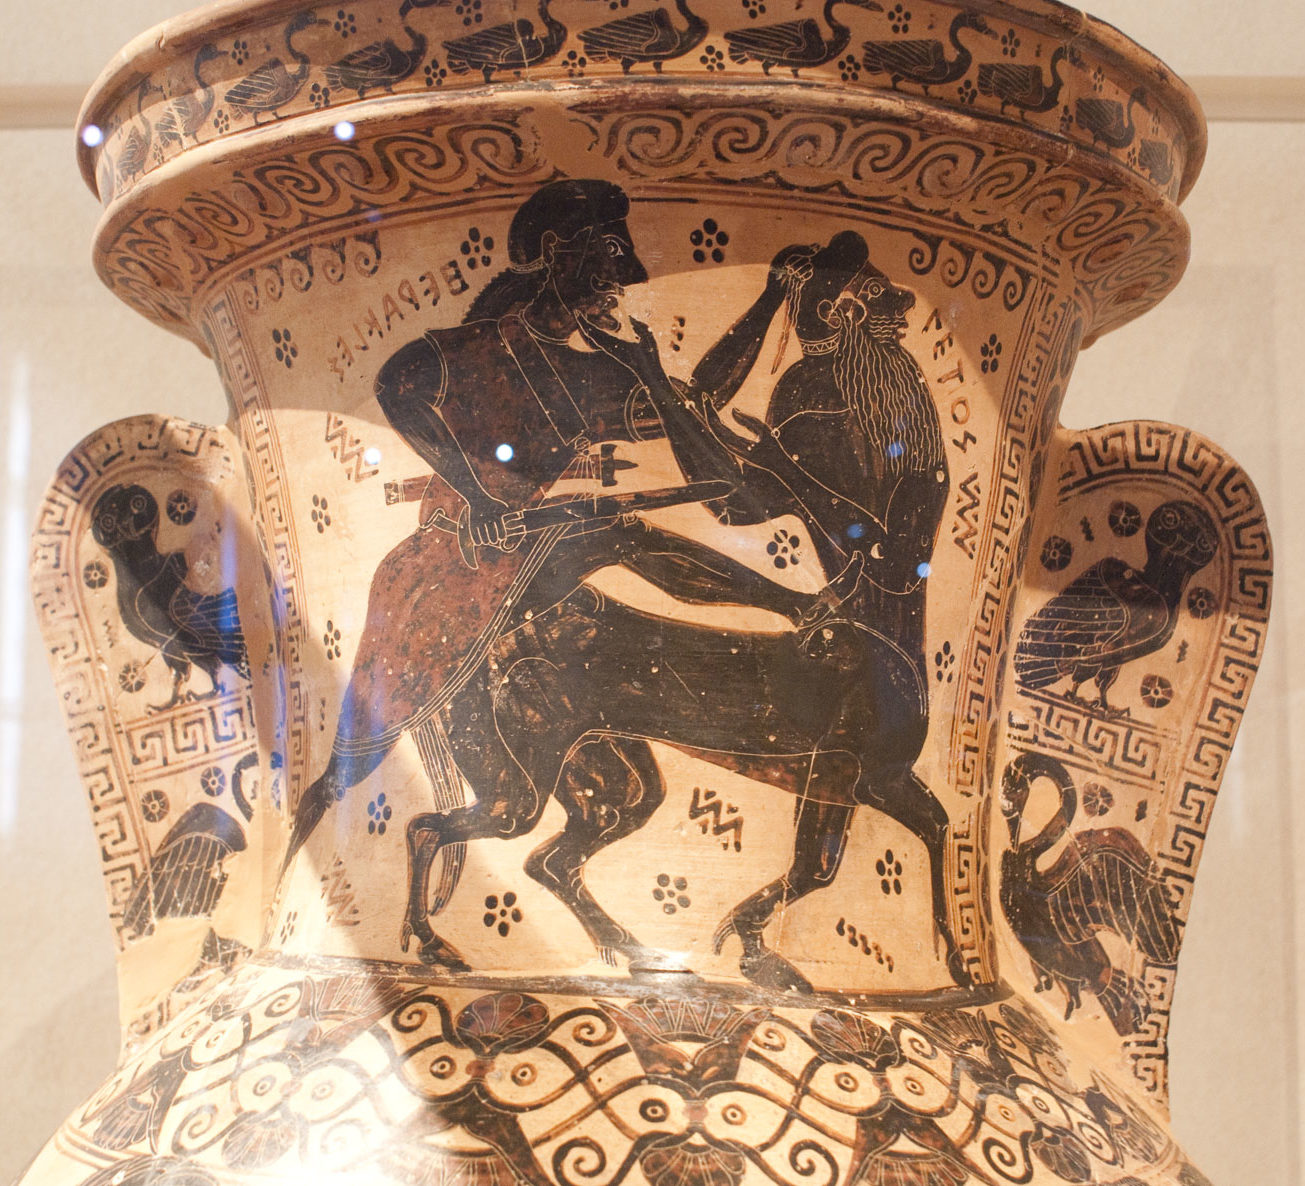 Heracles lunging at the centaur Nessus with a sword, kicking him in the back and grabbing his hair.